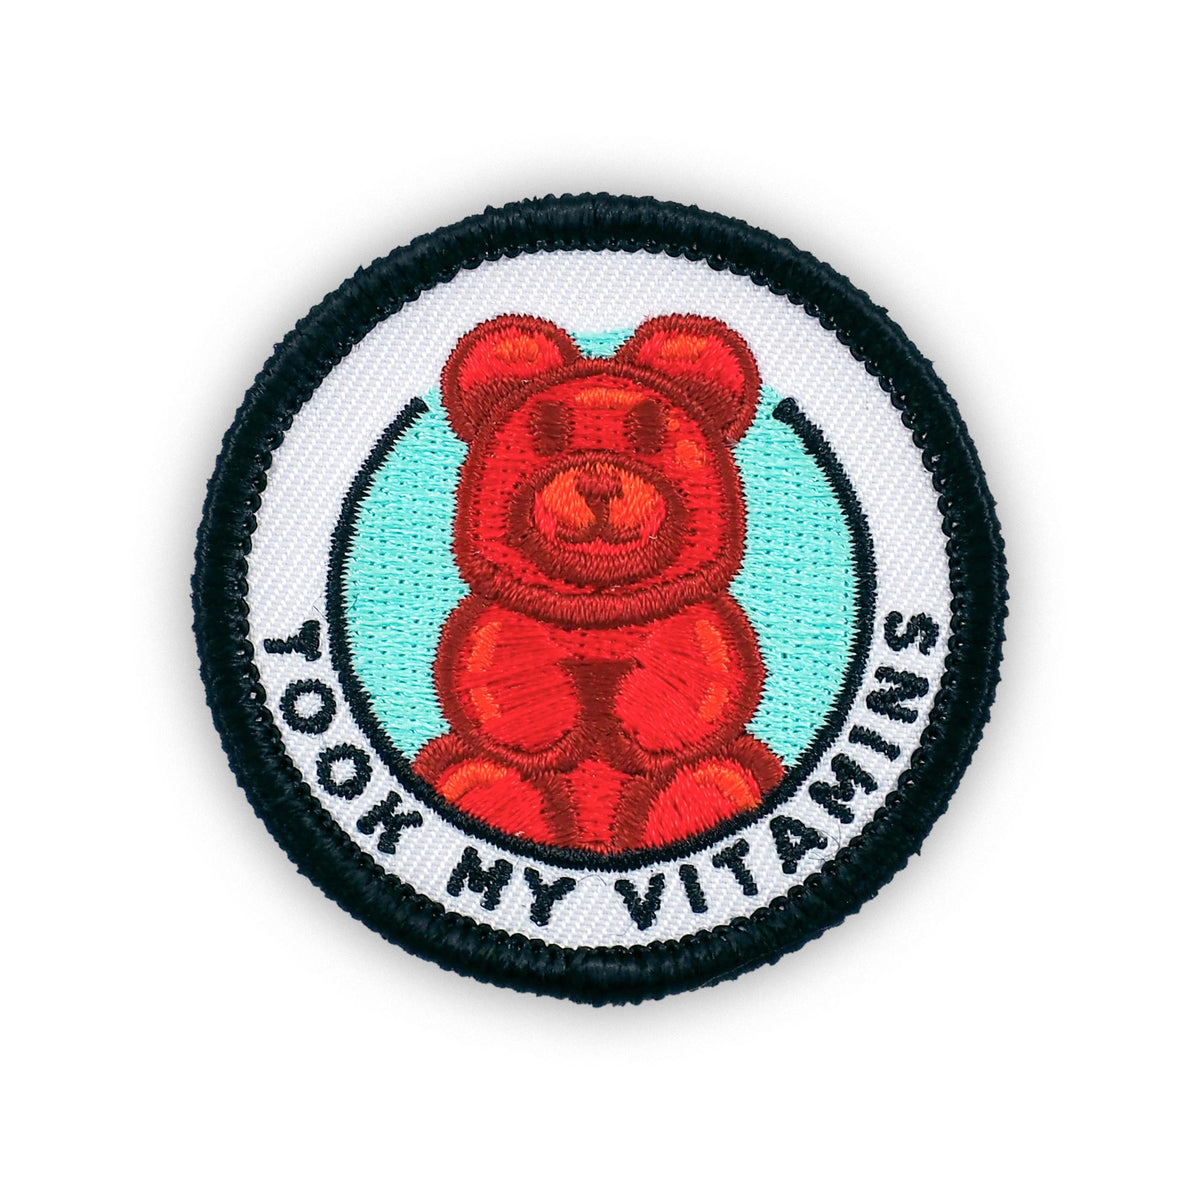 Took My Vitamins adulting merit badge patch for adults